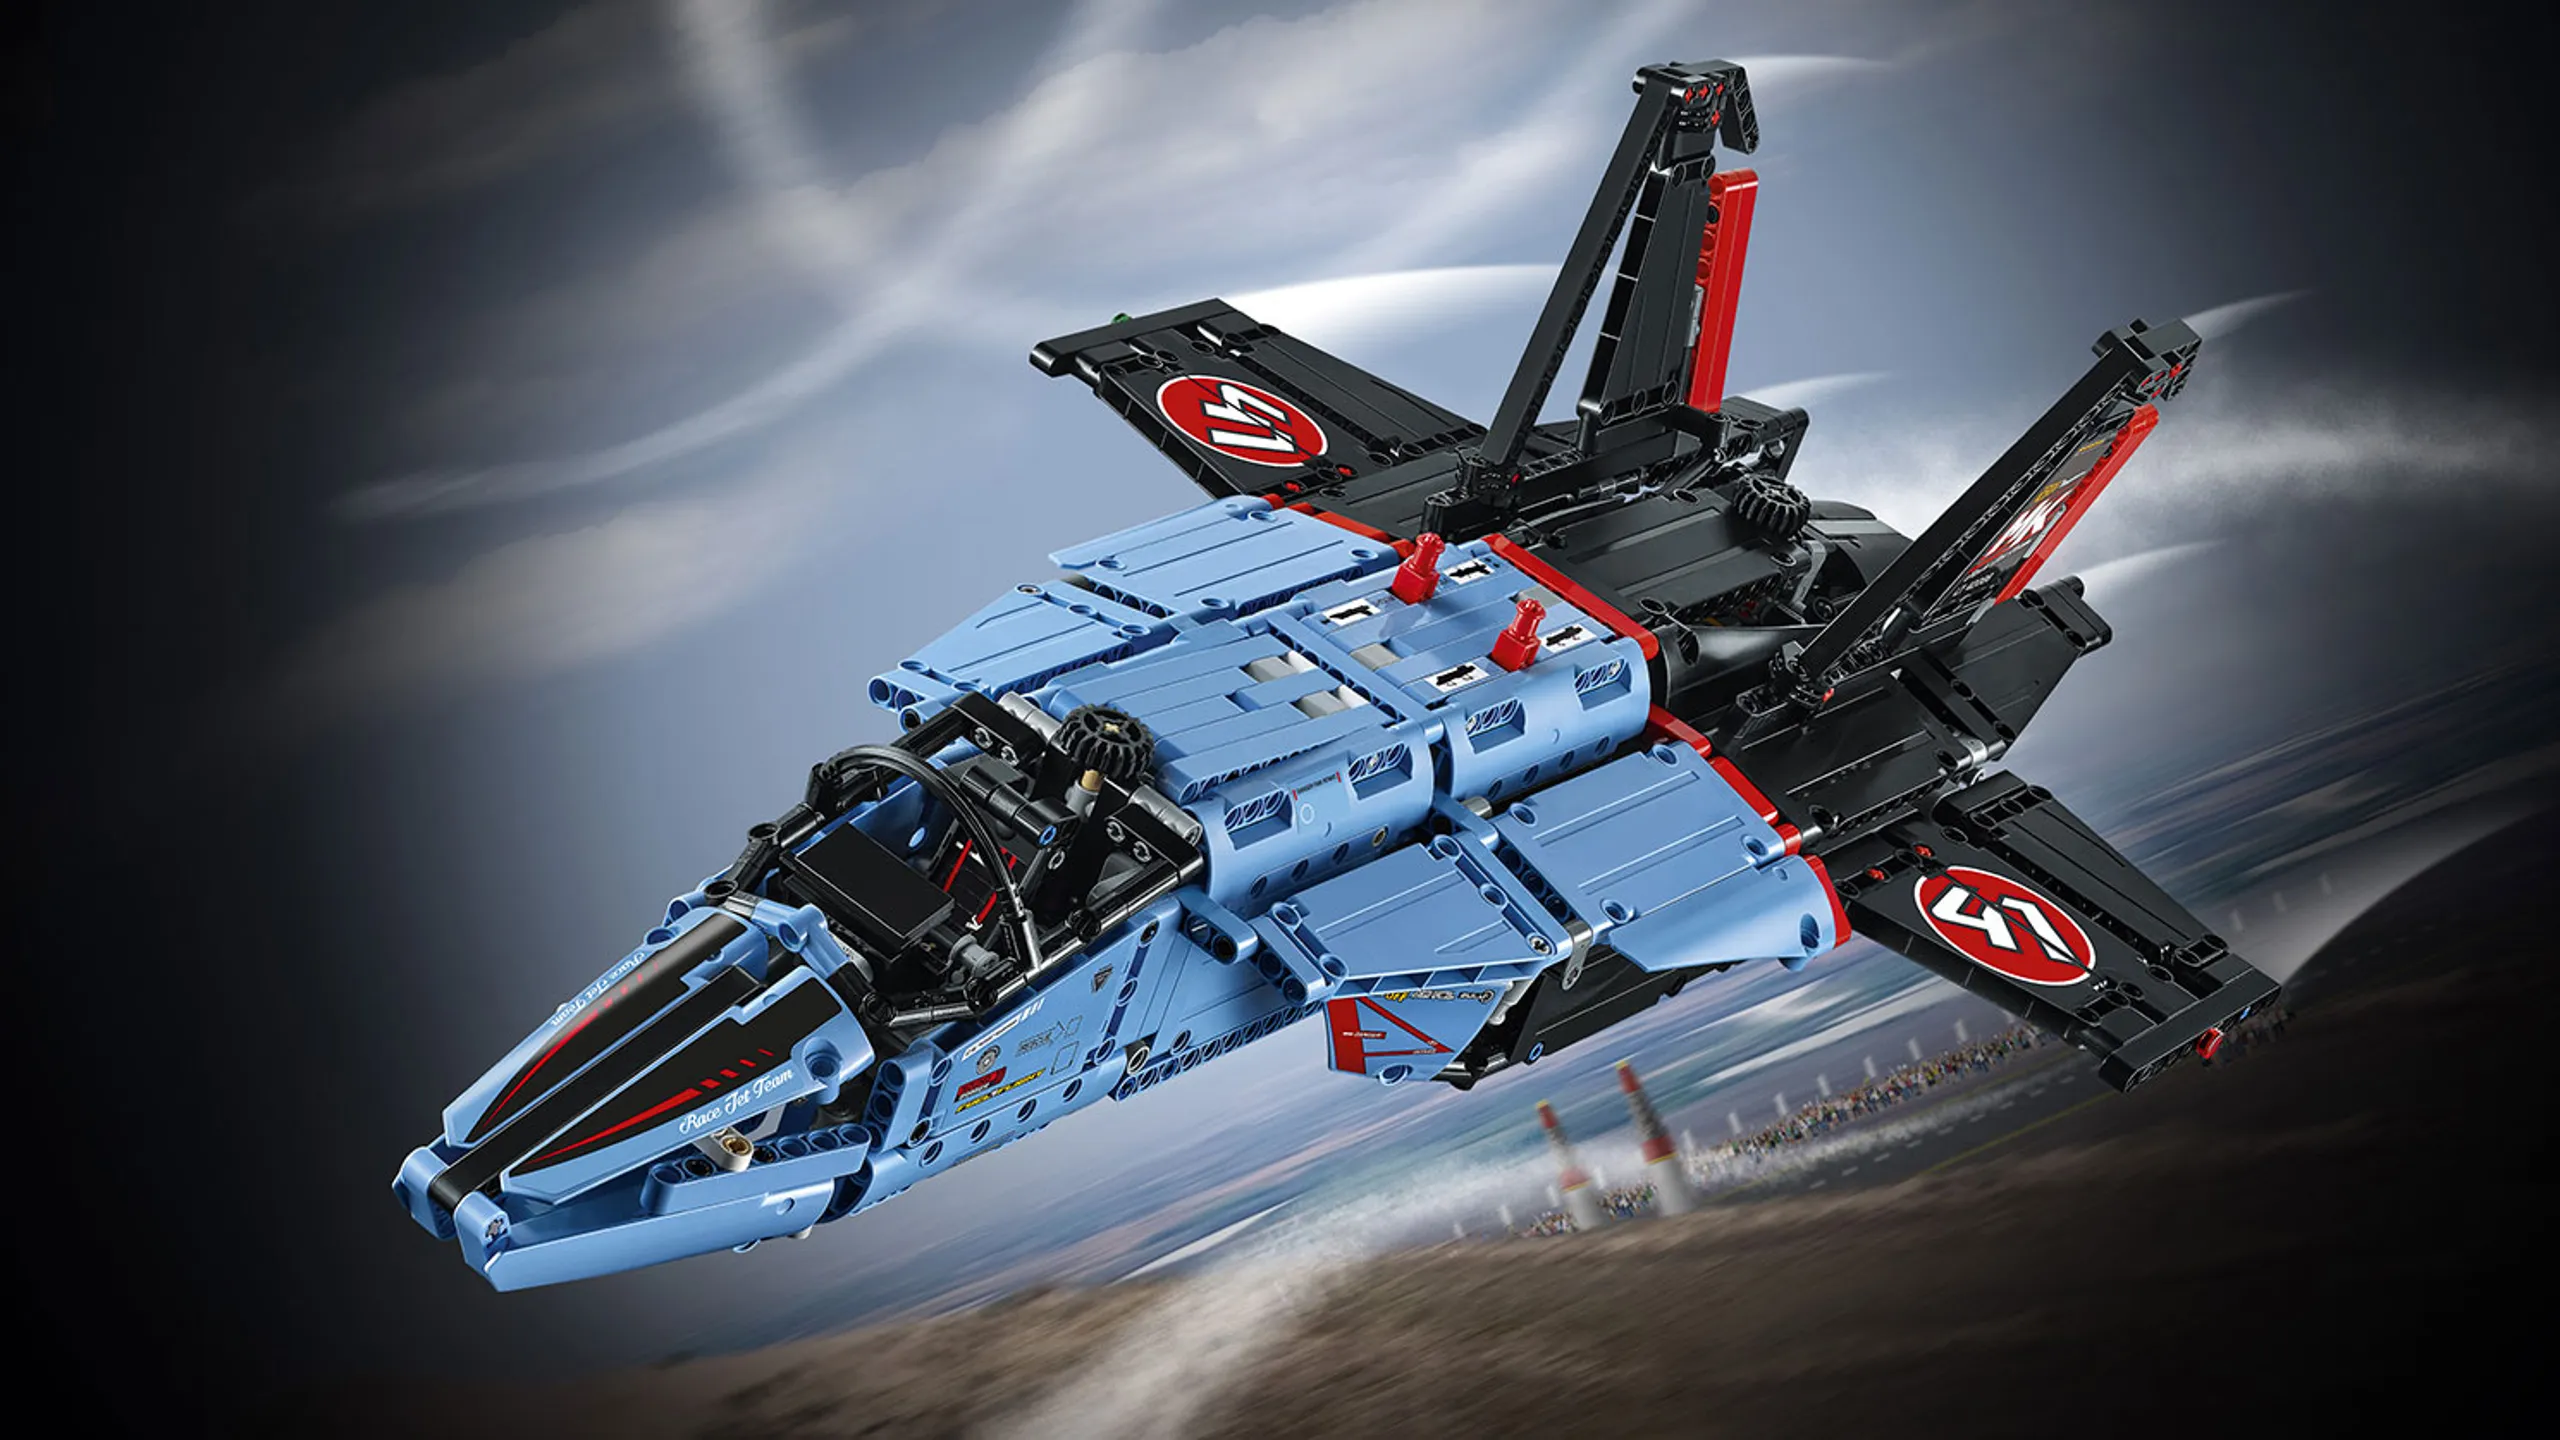 LEGO Technic - 42066 Air Race Jet -  The Air Race Jet features an awesome blue, black and red color scheme with cool racing stickers and an array of authentic details and exciting motorized functions.